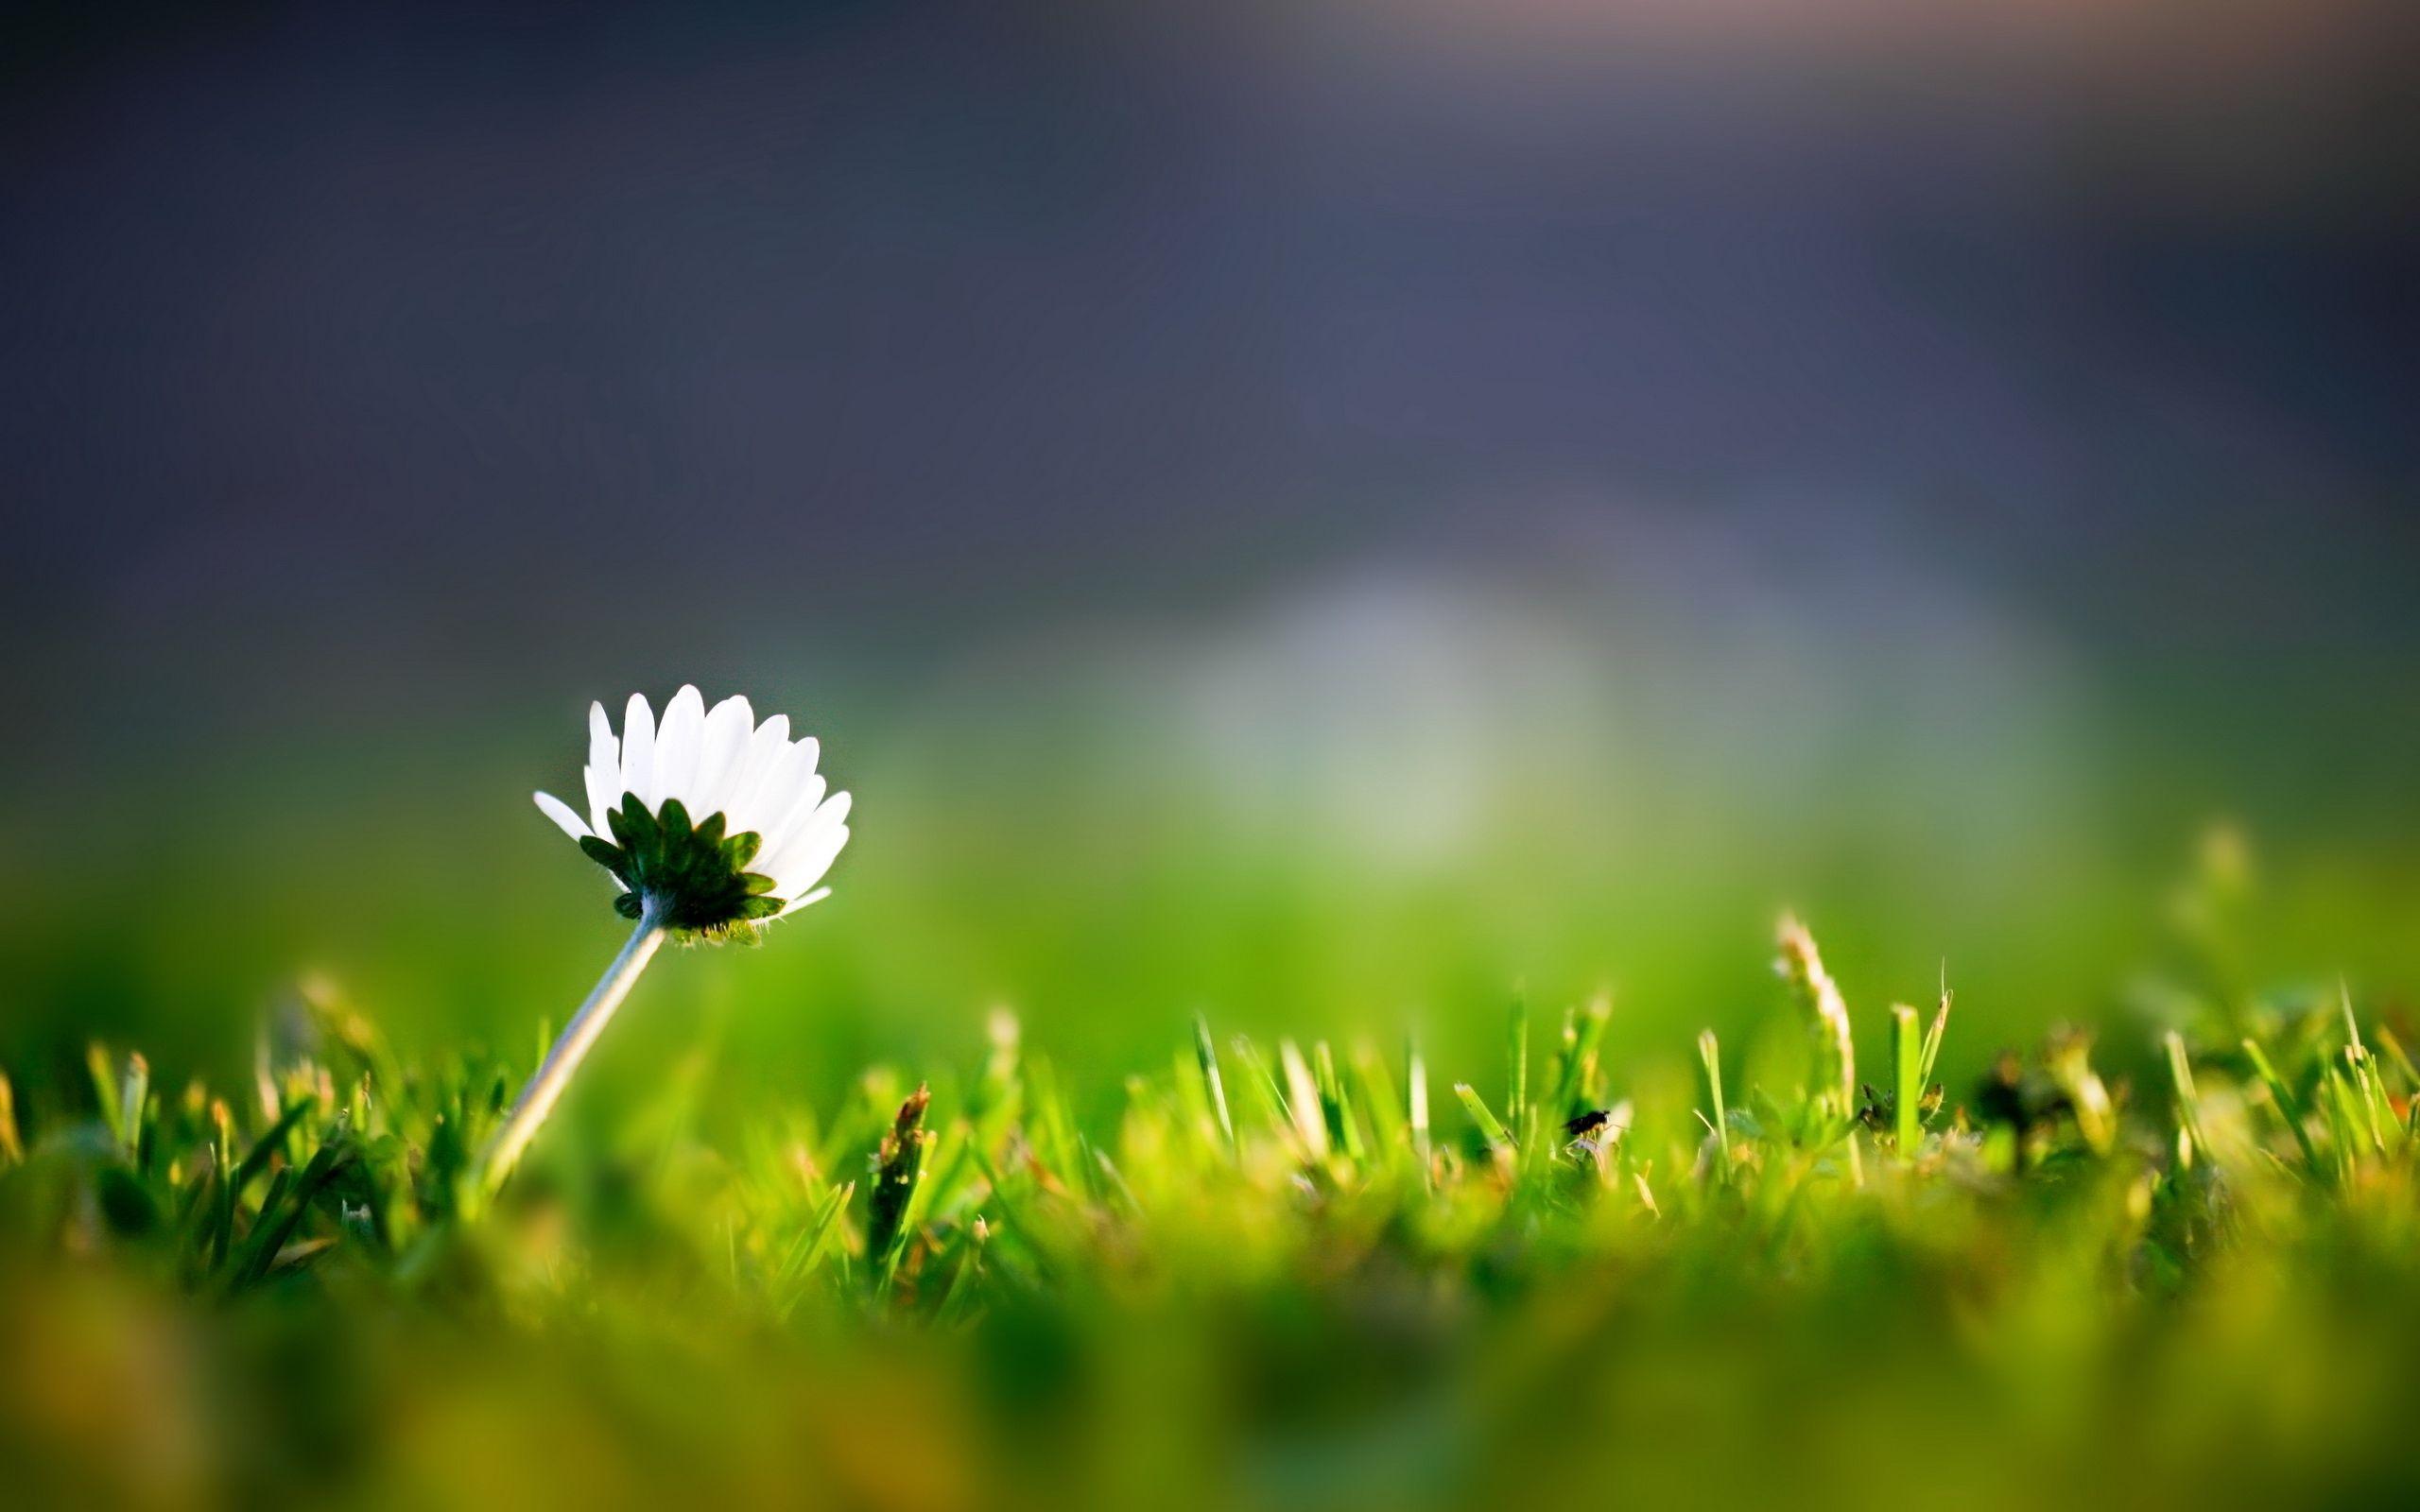 Grass and Flowers Wallpapers - Top Free Grass and Flowers Backgrounds - WallpaperAccess